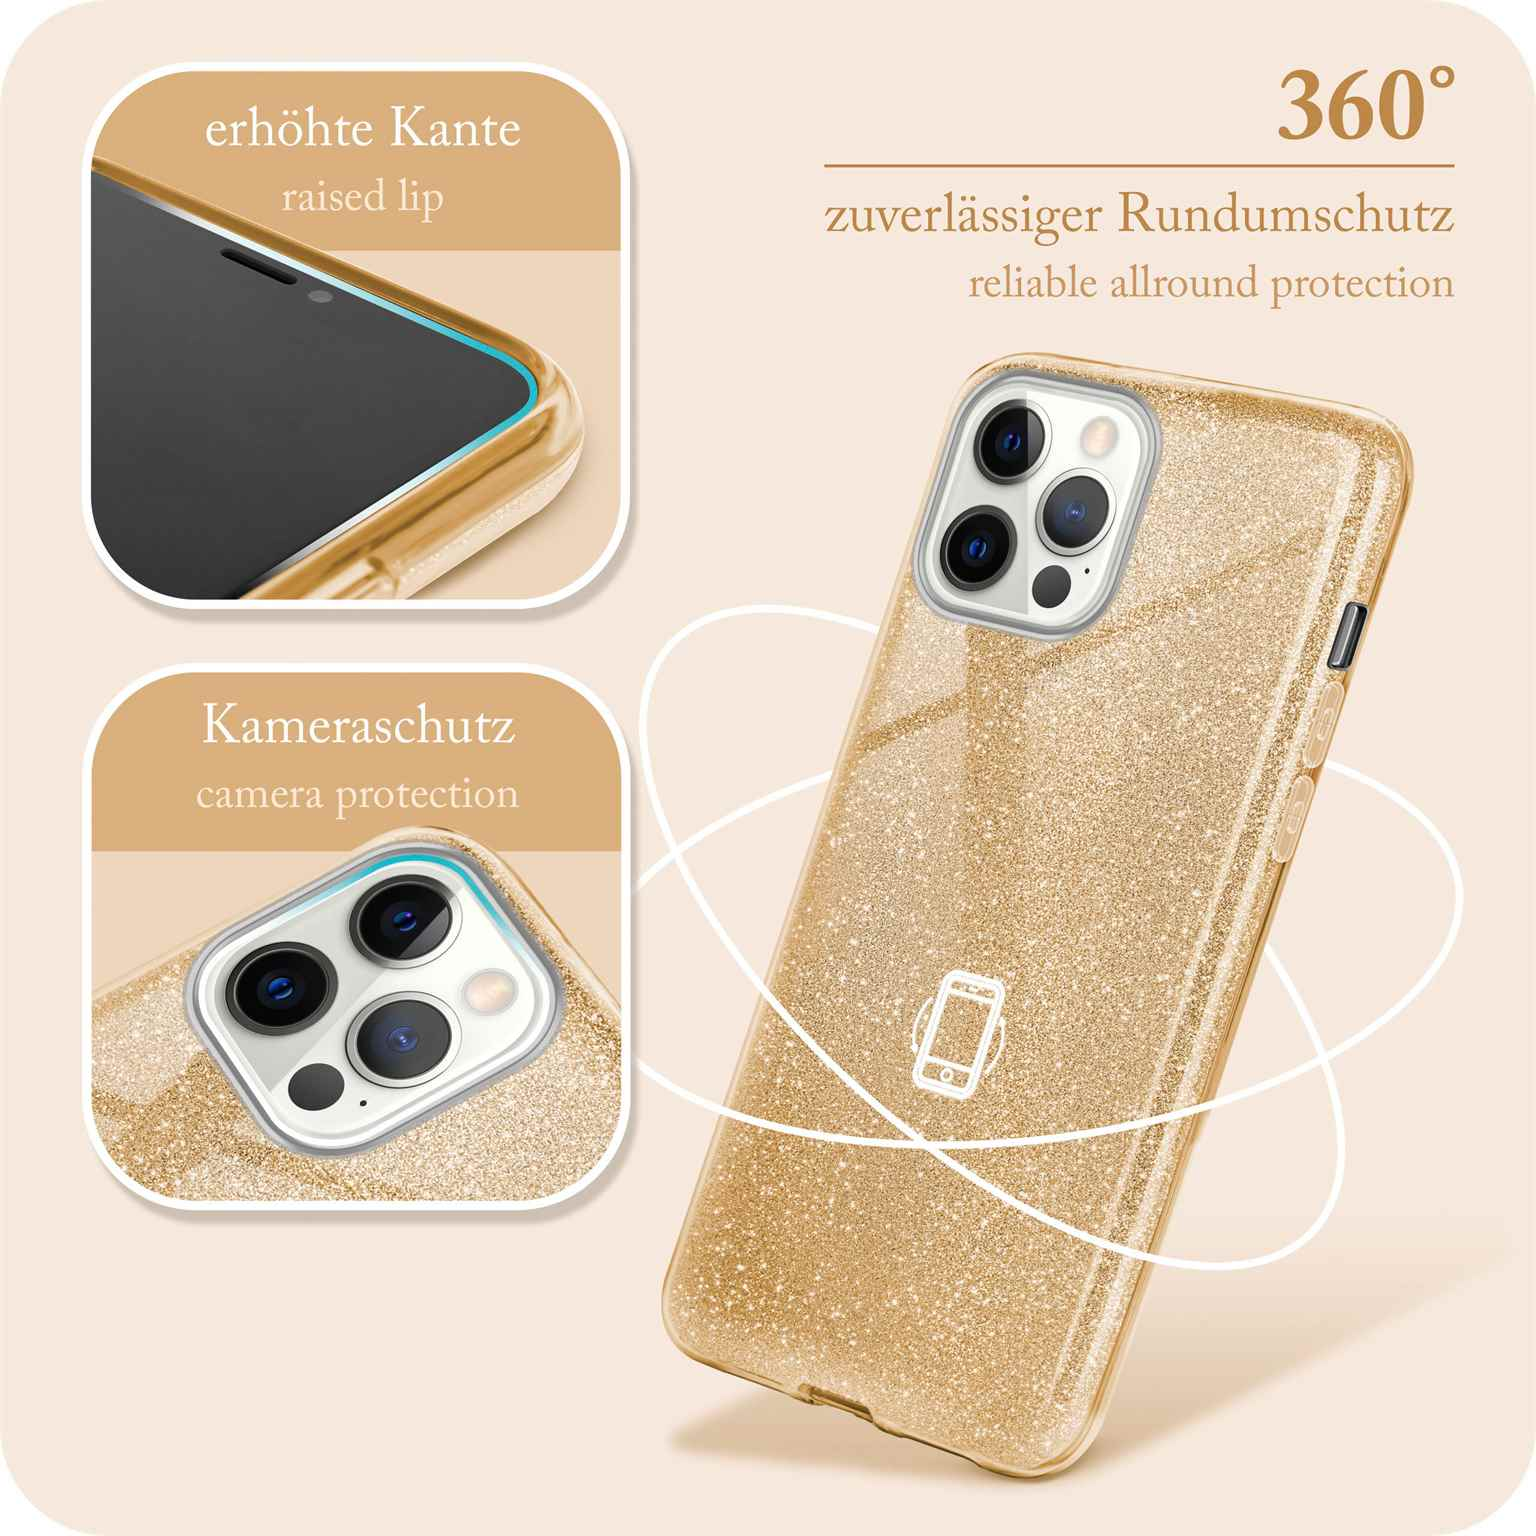 ONEFLOW Glitter Case, Backcover, Apple, 12 Pro iPhone - Gold Shine Max